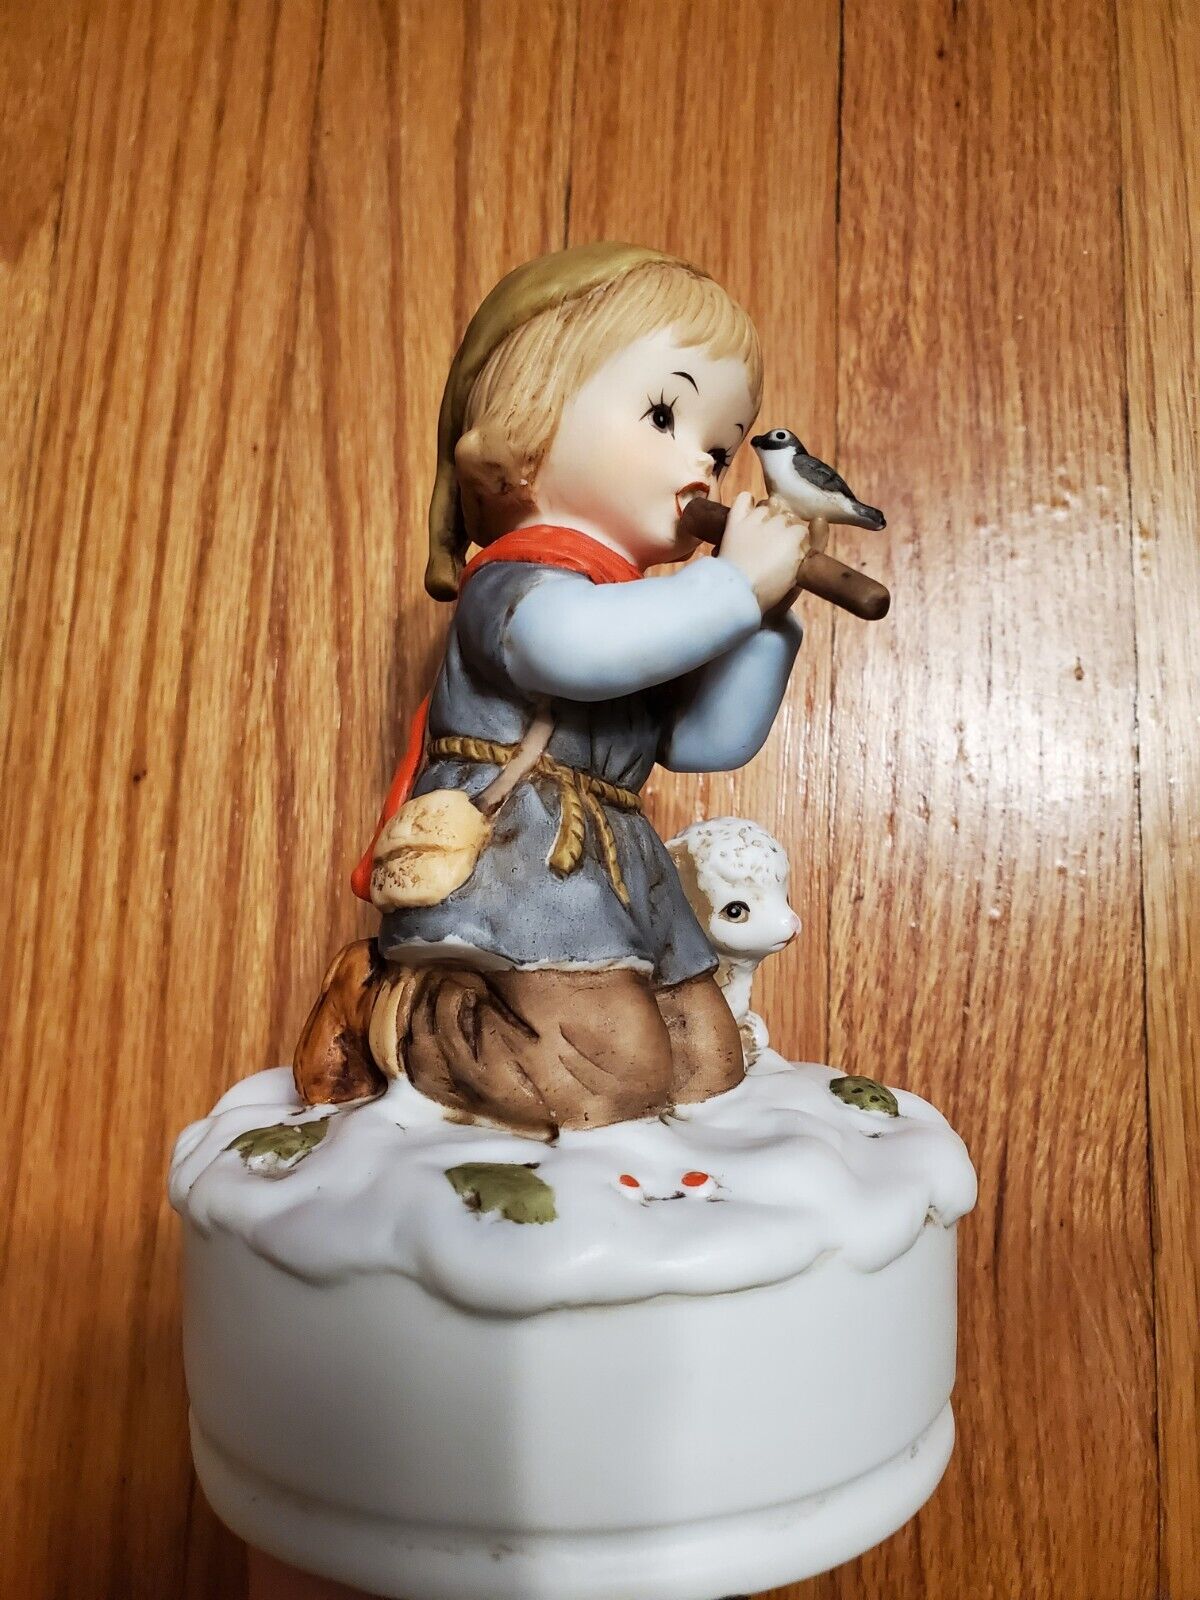 Vtg 1984 Enesco Wind-Up Musical Figurine - Plays Joy to the World Tested/Works